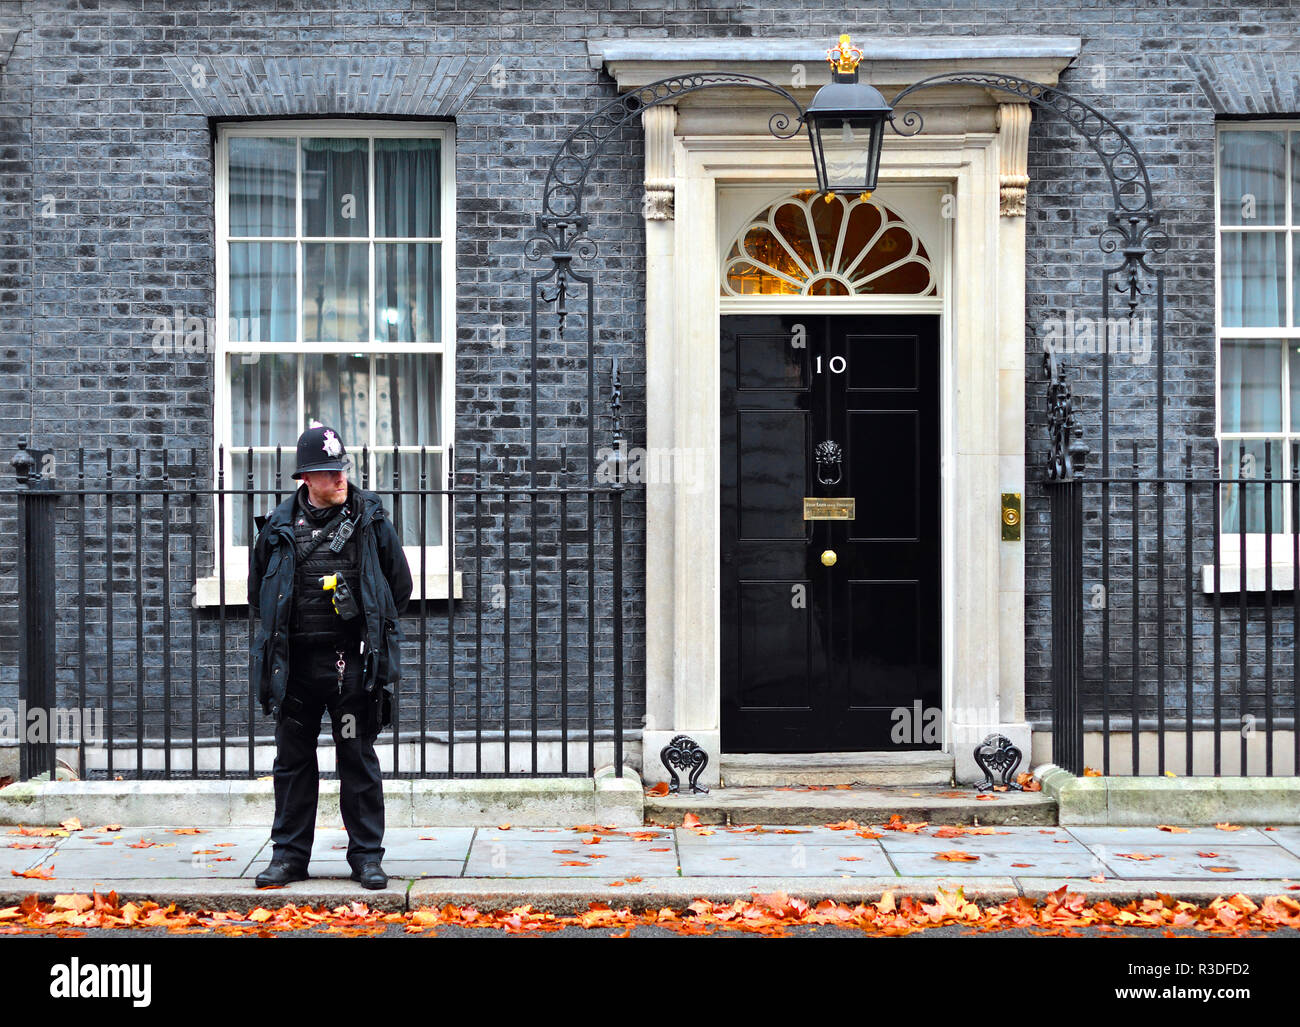 Police officer outside number 10 Downing Street, London, England, UK